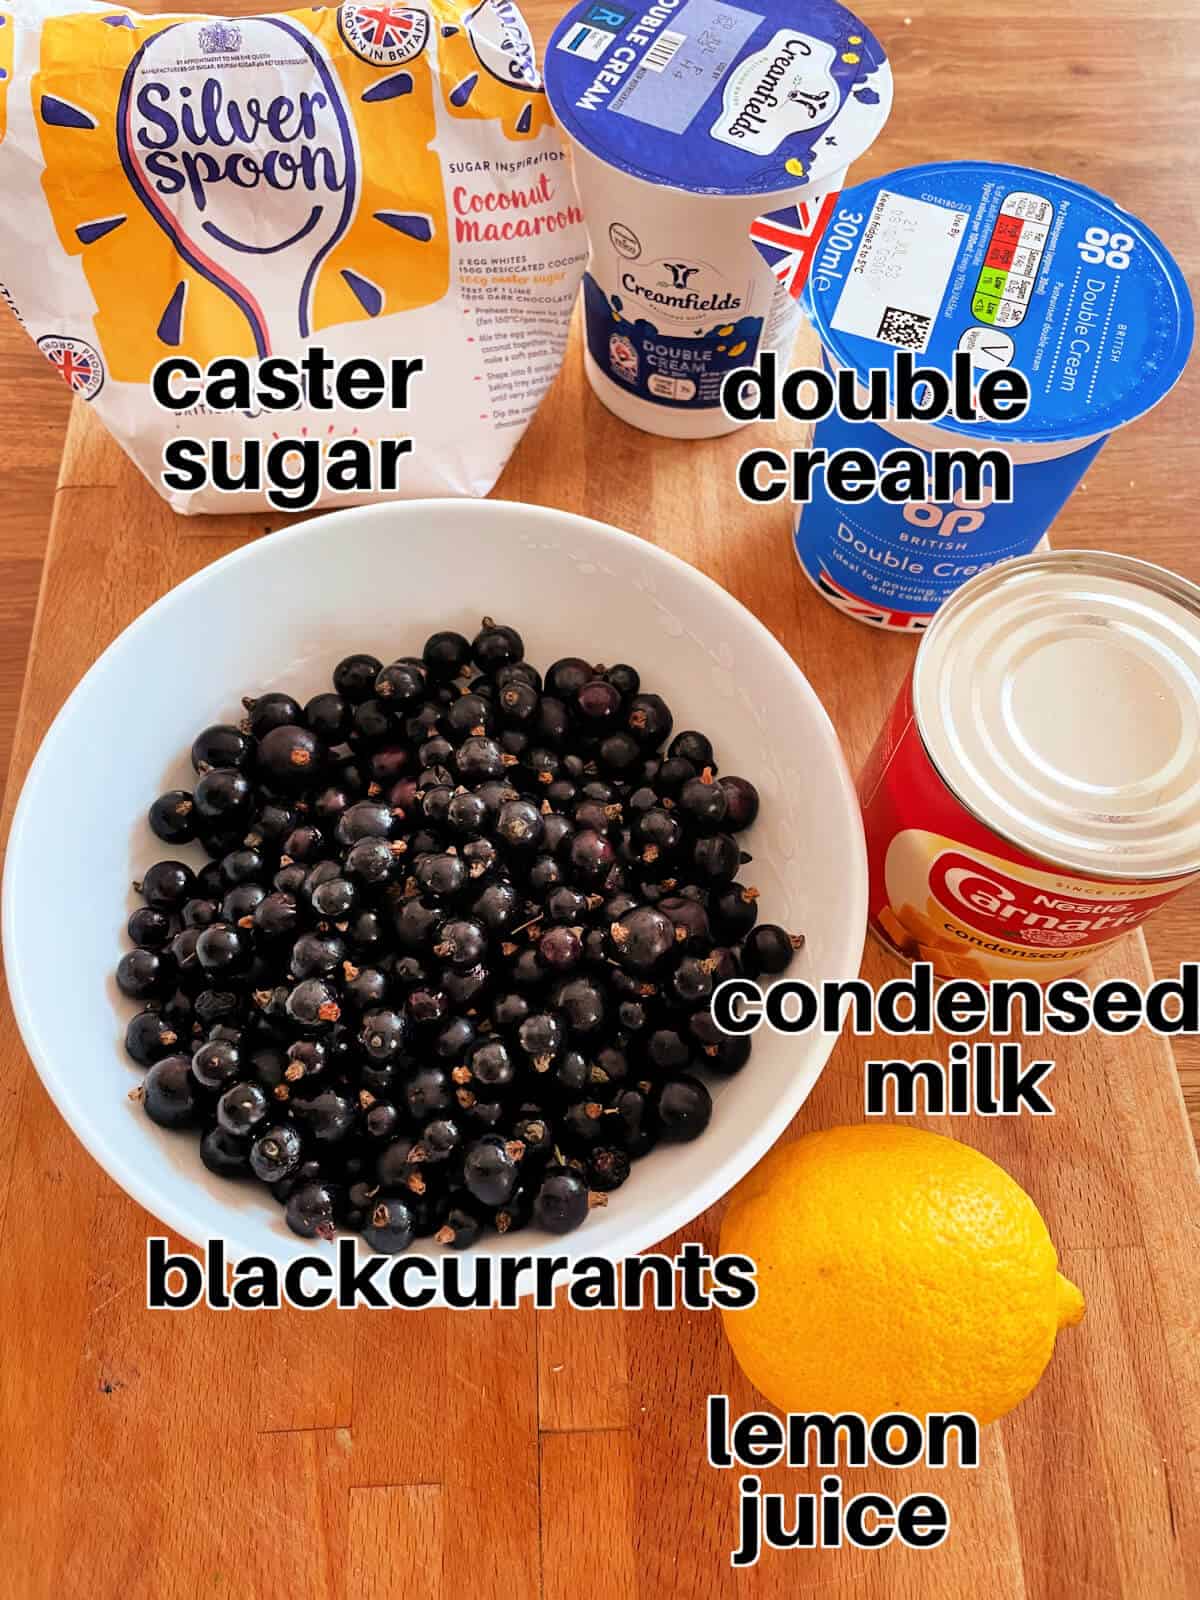 Labelled ingredients for no churn blackcurrant ice cream.